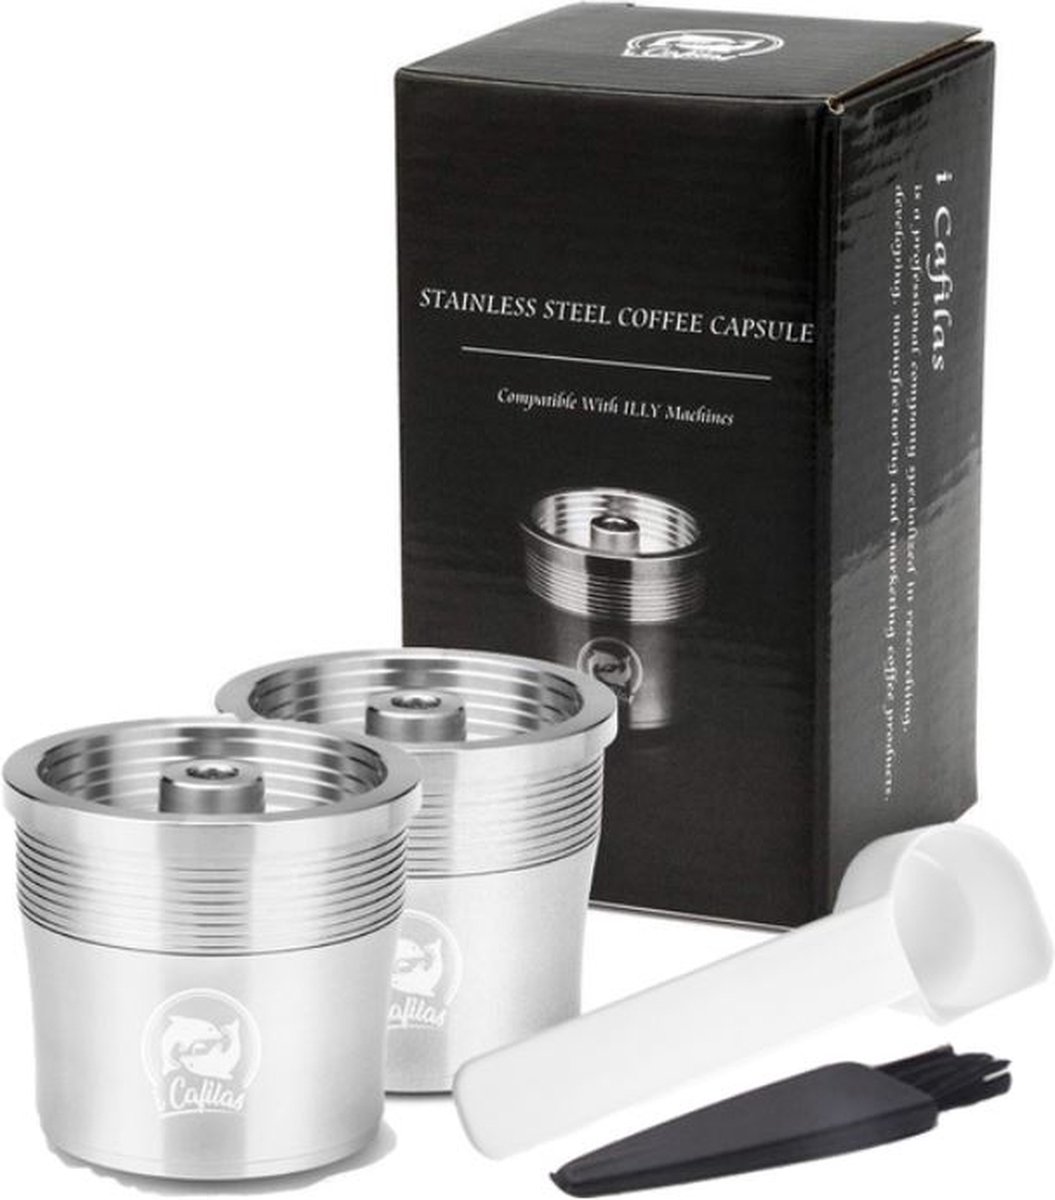 Hervulbare Illy koffiecup - Illy Capsule - RVS - 2 cups - illy hervulbare koffie capsule